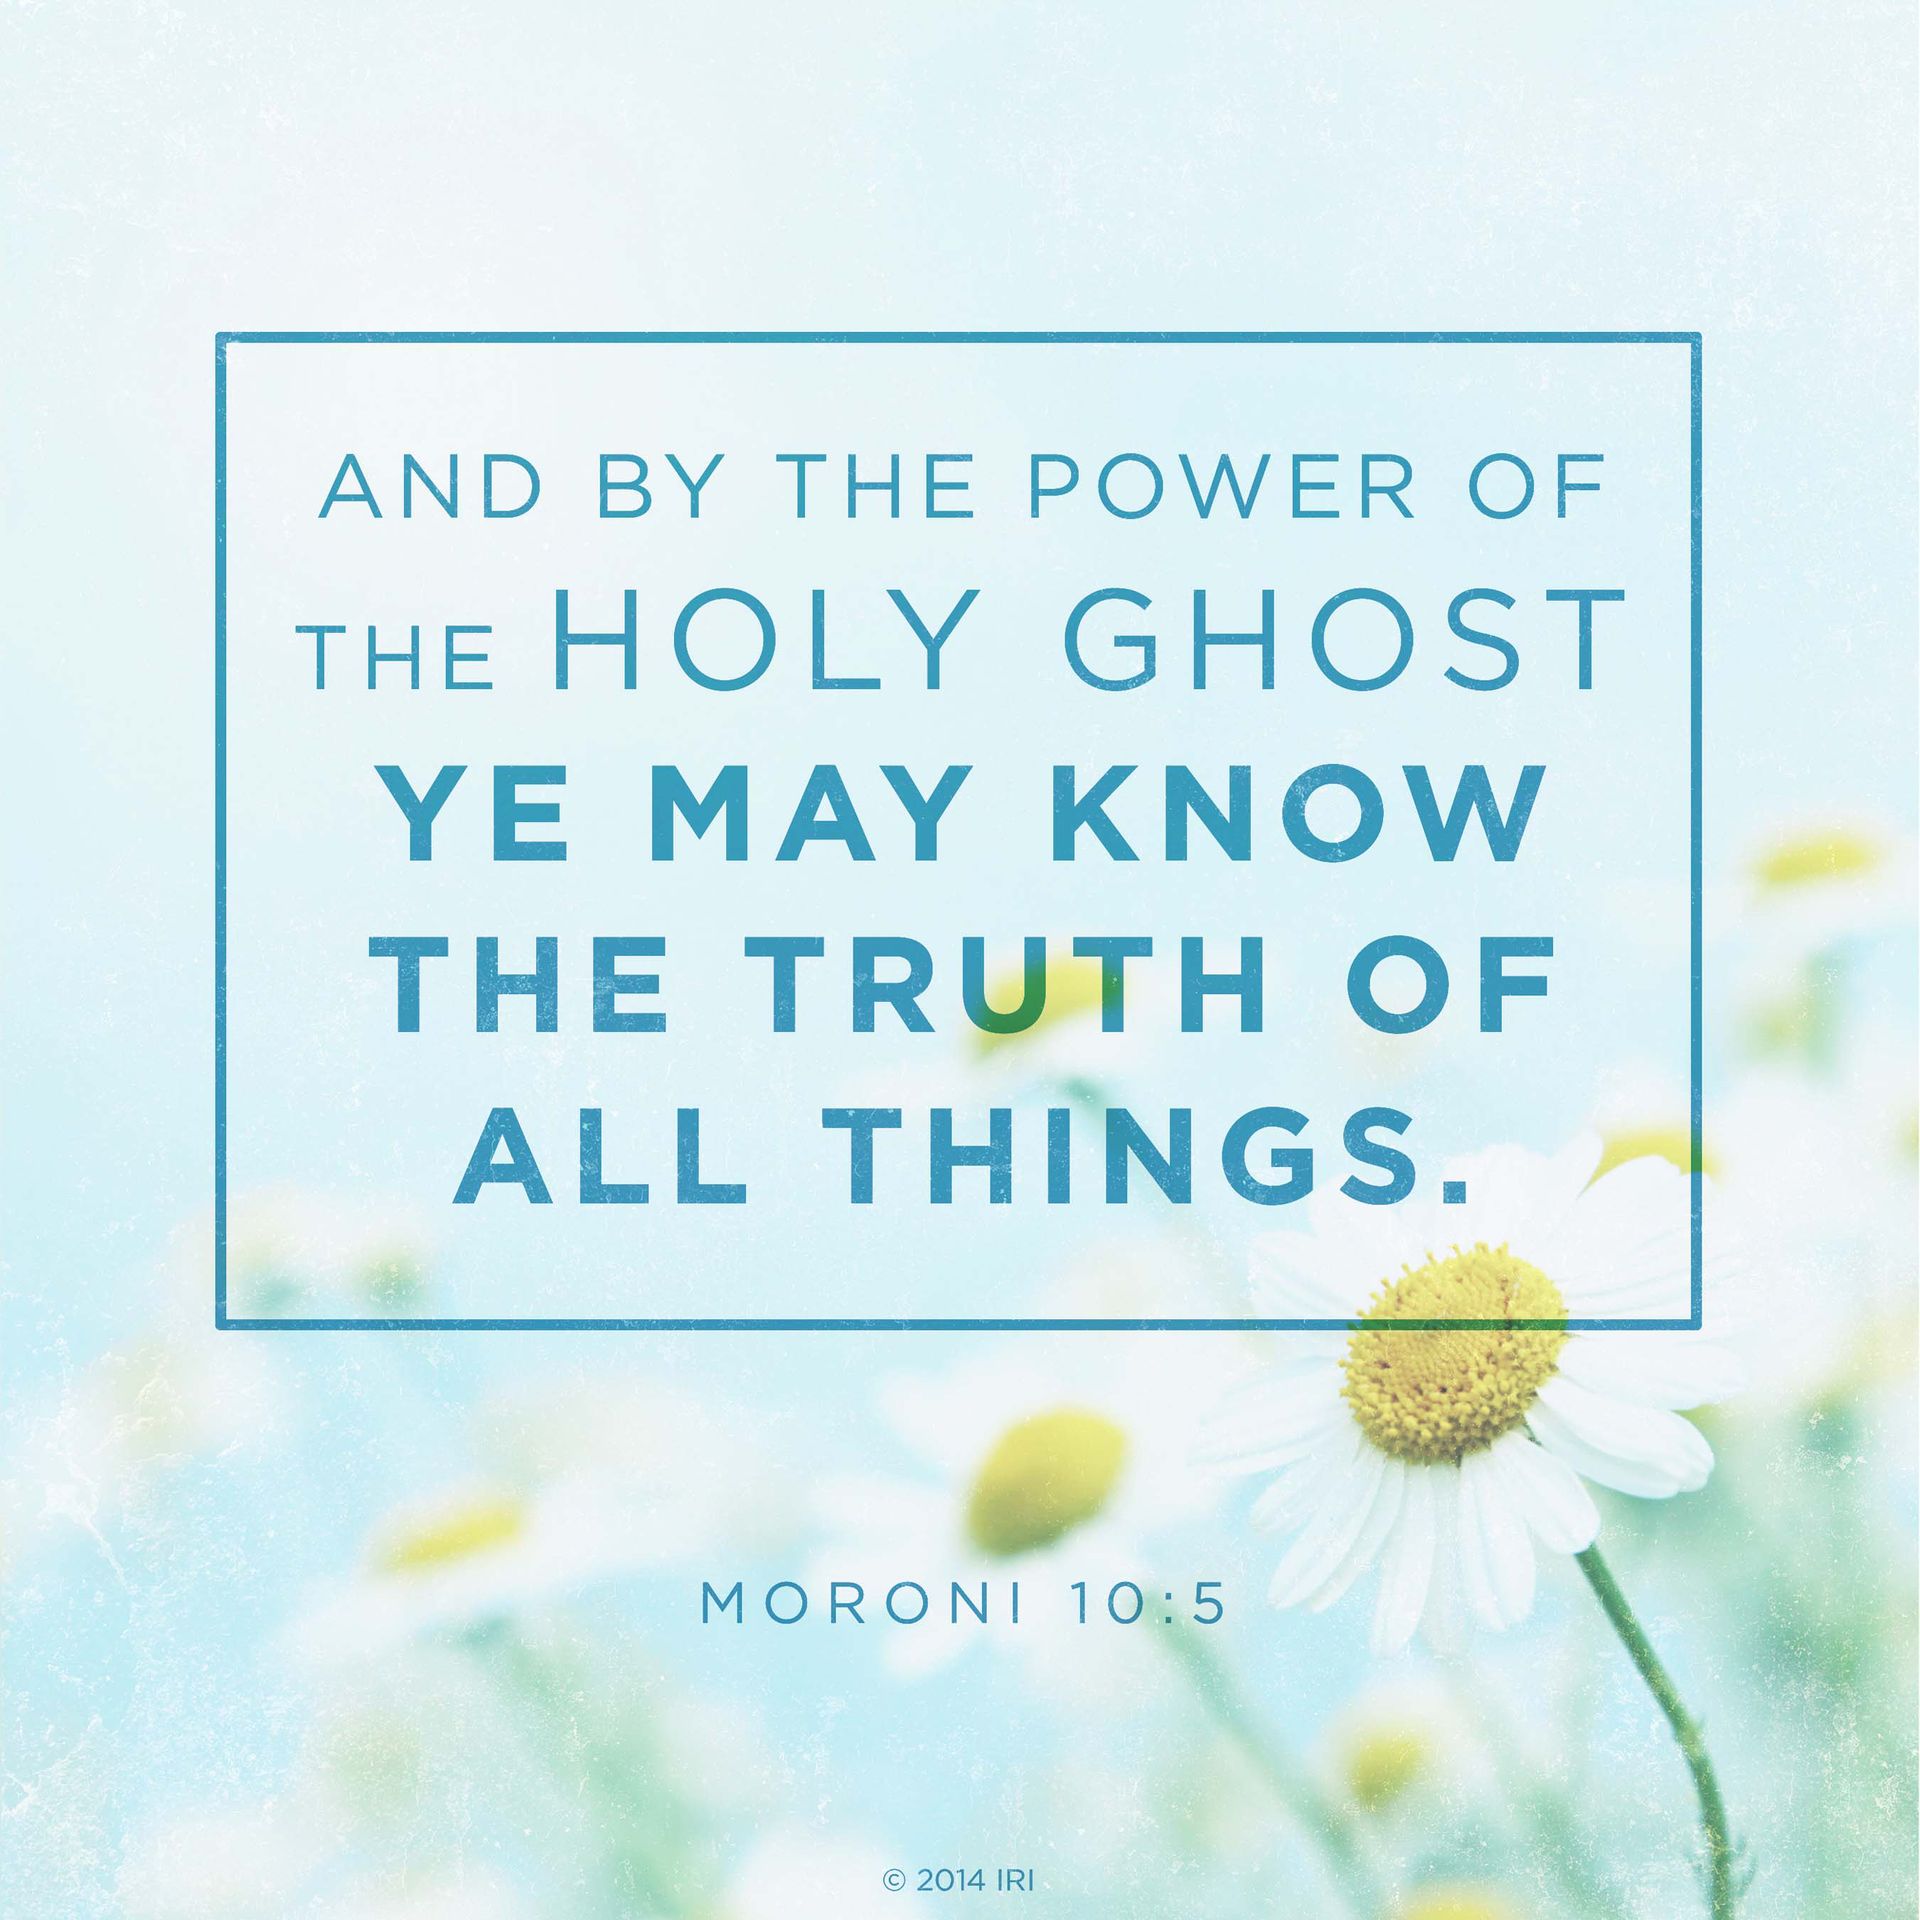 “And by the power of the Holy Ghost ye may know the truth of all things.”—Moroni 10:5